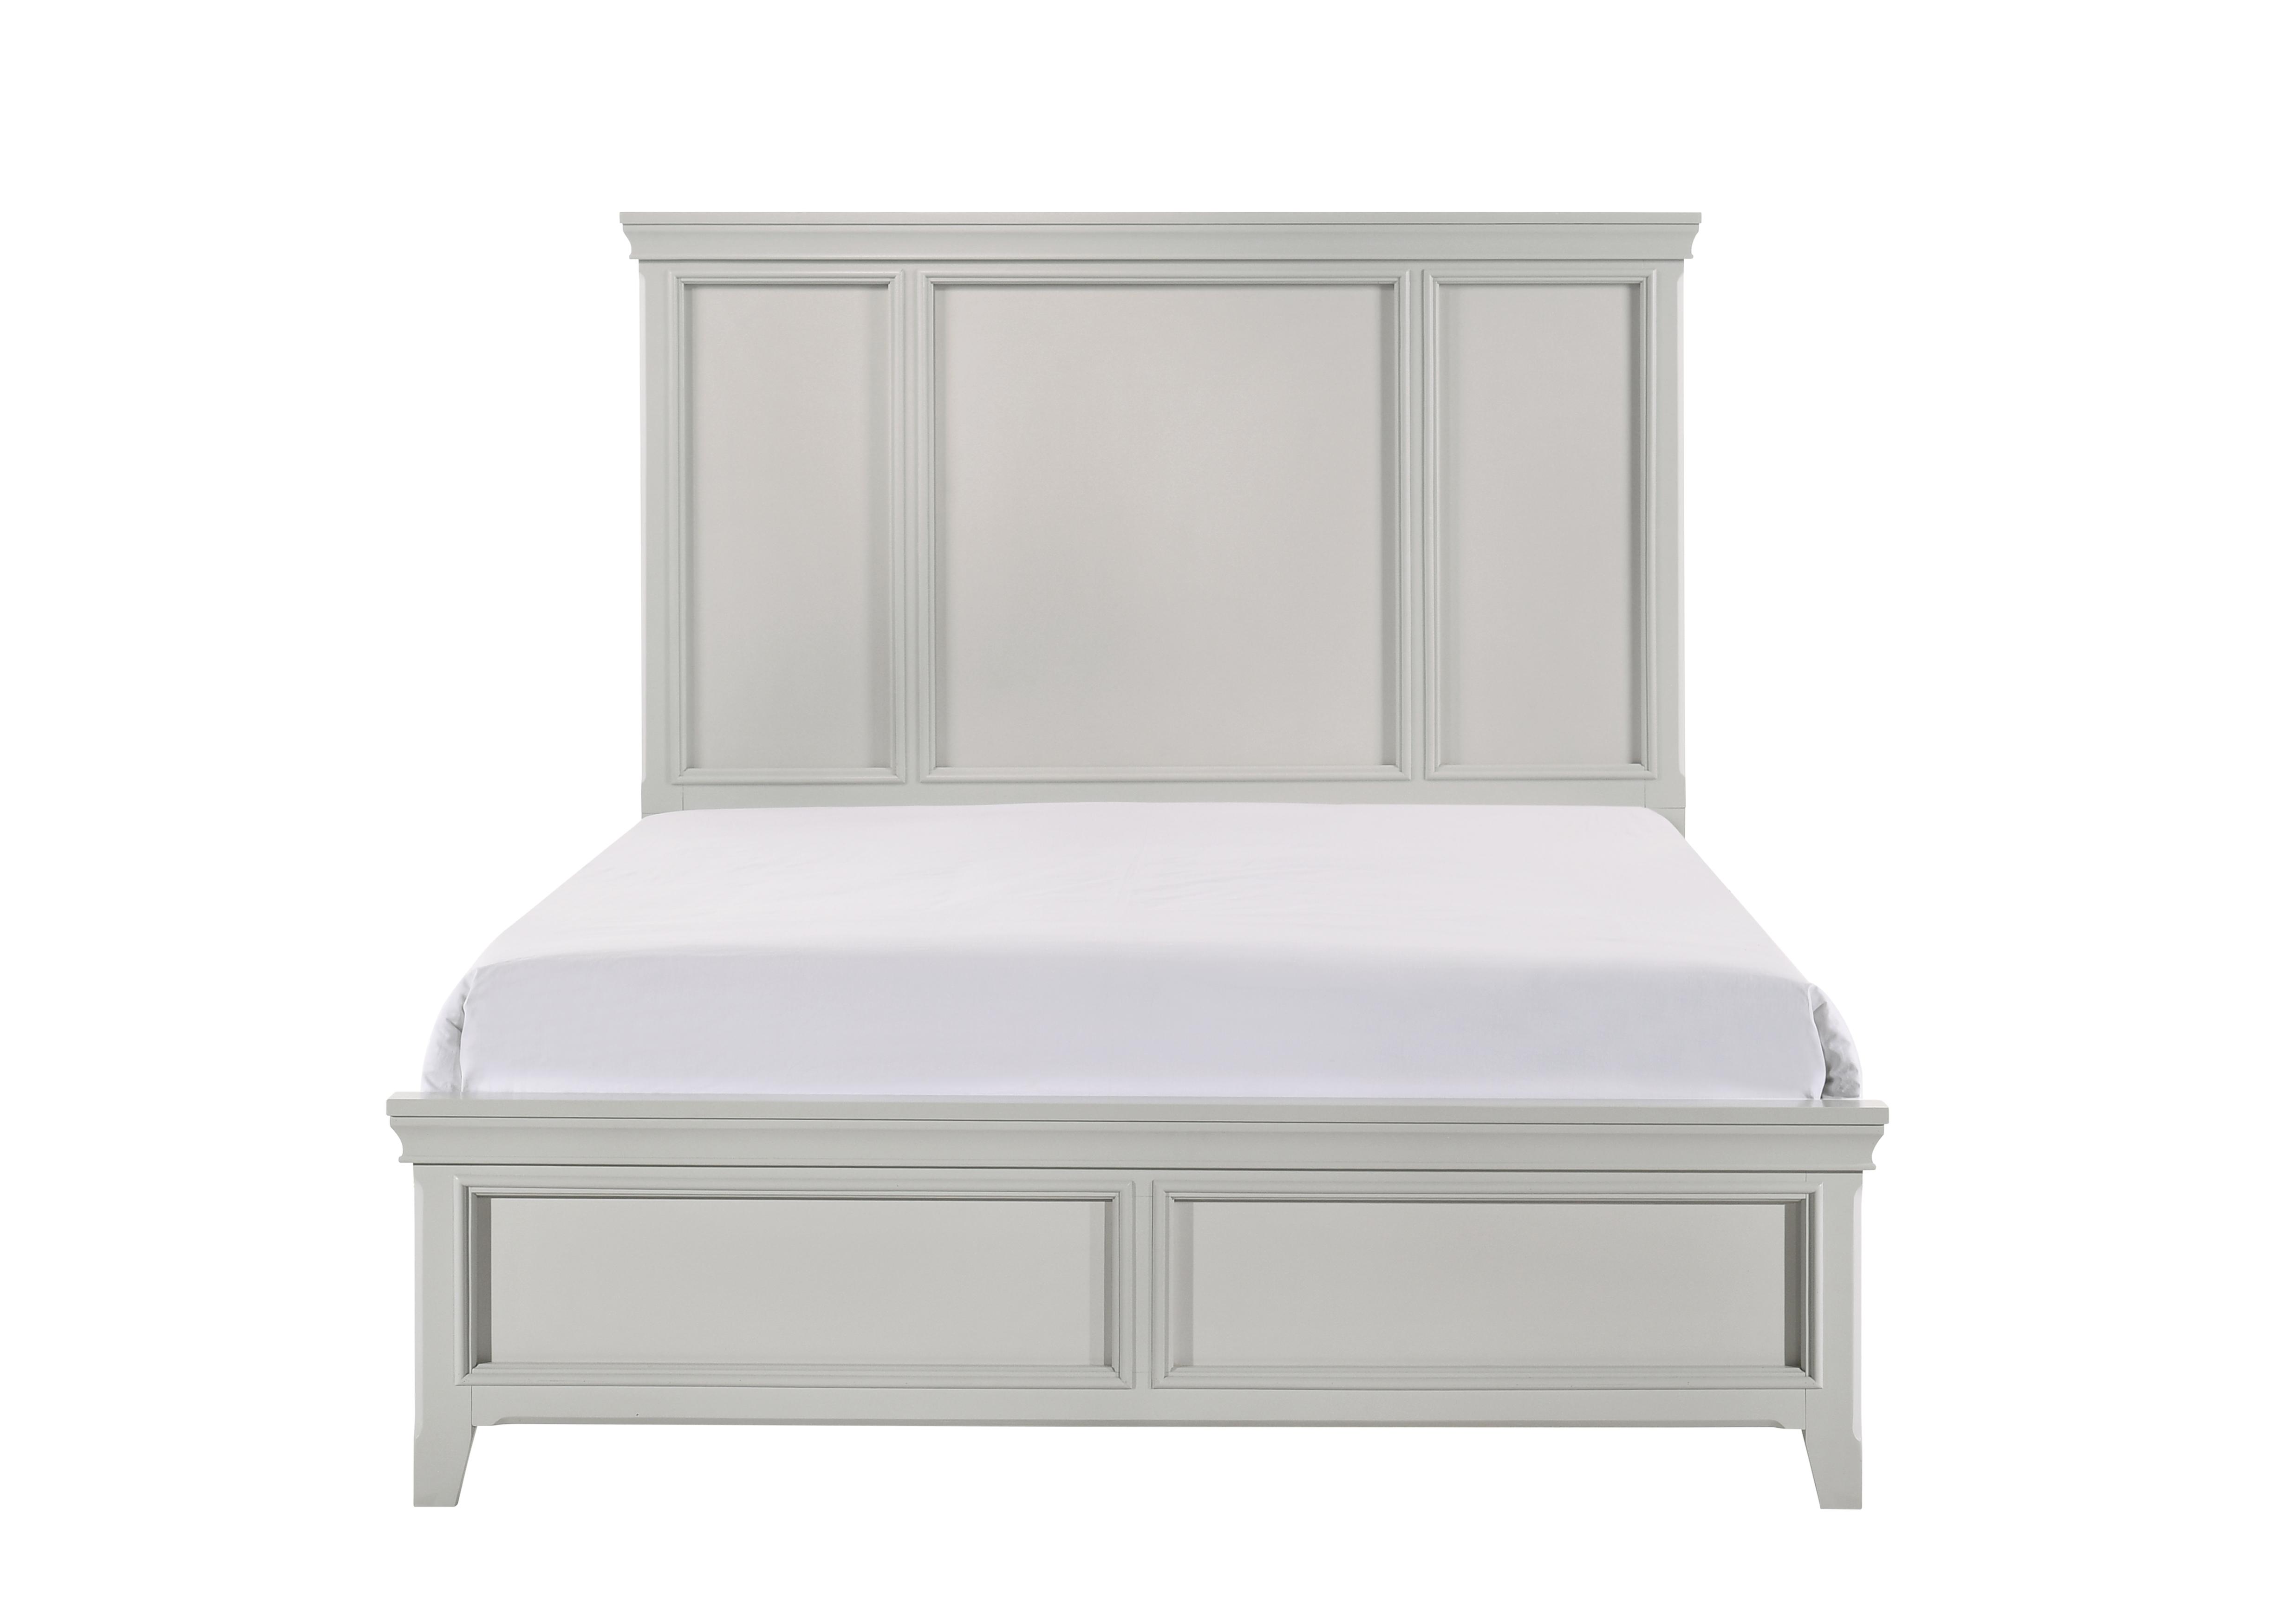 Modern, Transitional Panel Bed MEADOW 200-105 200-105 in Light Gray, White 